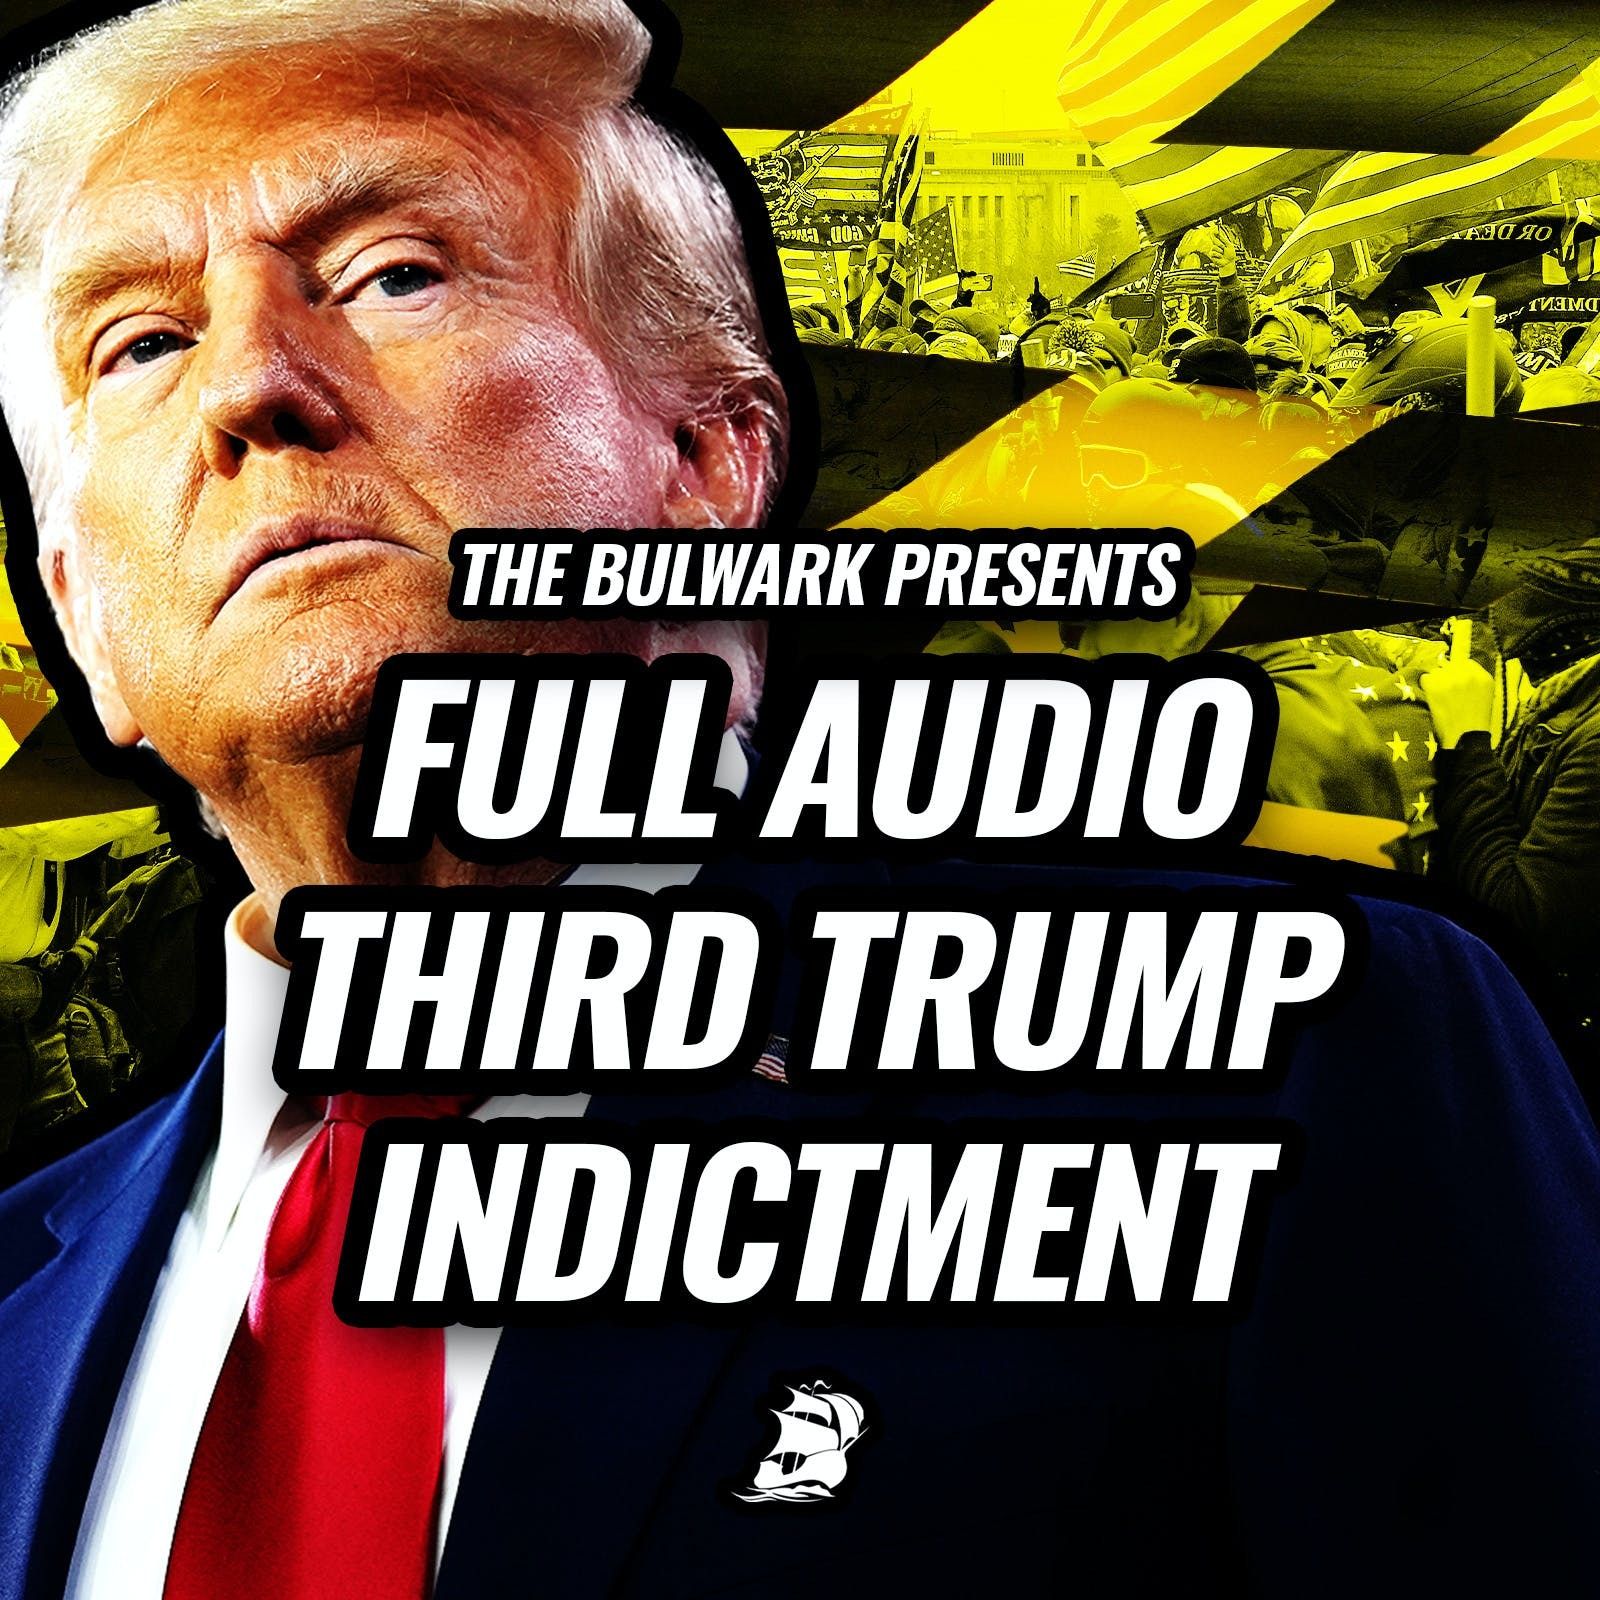 Bonus Episode: Listen to the Third Indictment  by The Bulwark Podcast